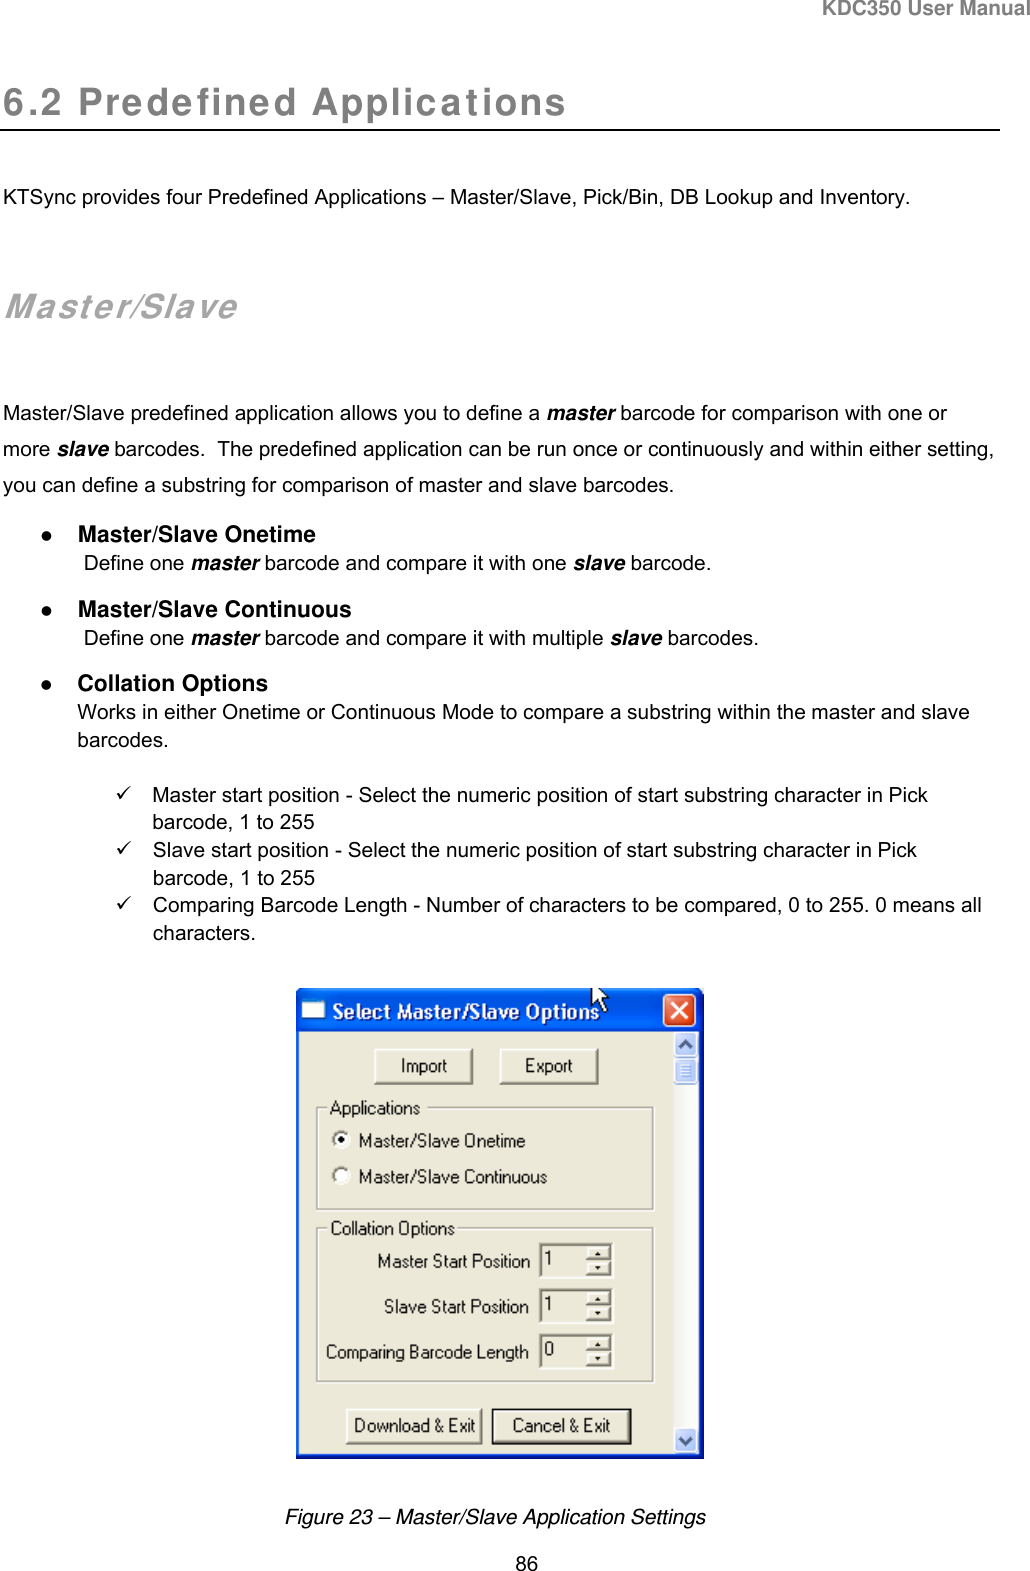 KDC350 User Manual  86  6.2 Predefined Applications  KTSync provides four Predefined Applications – Master/Slave, Pick/Bin, DB Lookup and Inventory.   Master/Slave  Master/Slave predefined application allows you to define a master barcode for comparison with one or more slave barcodes.  The predefined application can be run once or continuously and within either setting, you can define a substring for comparison of master and slave barcodes.  Master/Slave Onetime  Define one master barcode and compare it with one slave barcode.   Master/Slave Continuous  Define one master barcode and compare it with multiple slave barcodes.   Collation Options Works in either Onetime or Continuous Mode to compare a substring within the master and slave barcodes.    Master start position - Select the numeric position of start substring character in Pick barcode, 1 to 255   Slave start position - Select the numeric position of start substring character in Pick barcode, 1 to 255   Comparing Barcode Length - Number of characters to be compared, 0 to 255. 0 means all characters.    Figure 23 – Master/Slave Application Settings